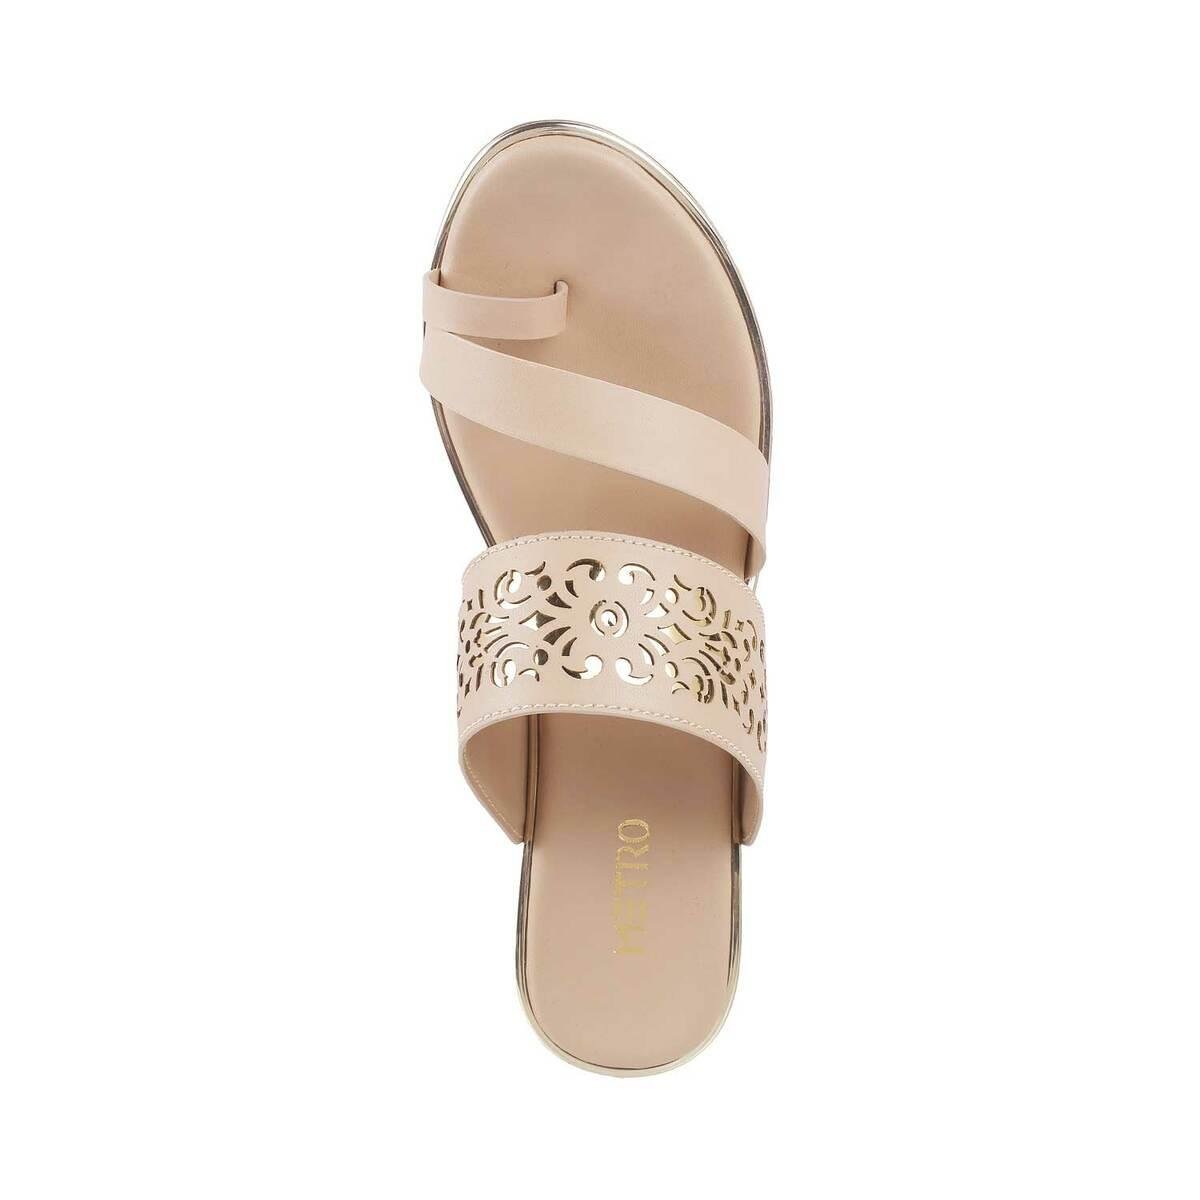 Buy Blue Flat Sandals for Women by Ginger by lifestyle Online | Ajio.com